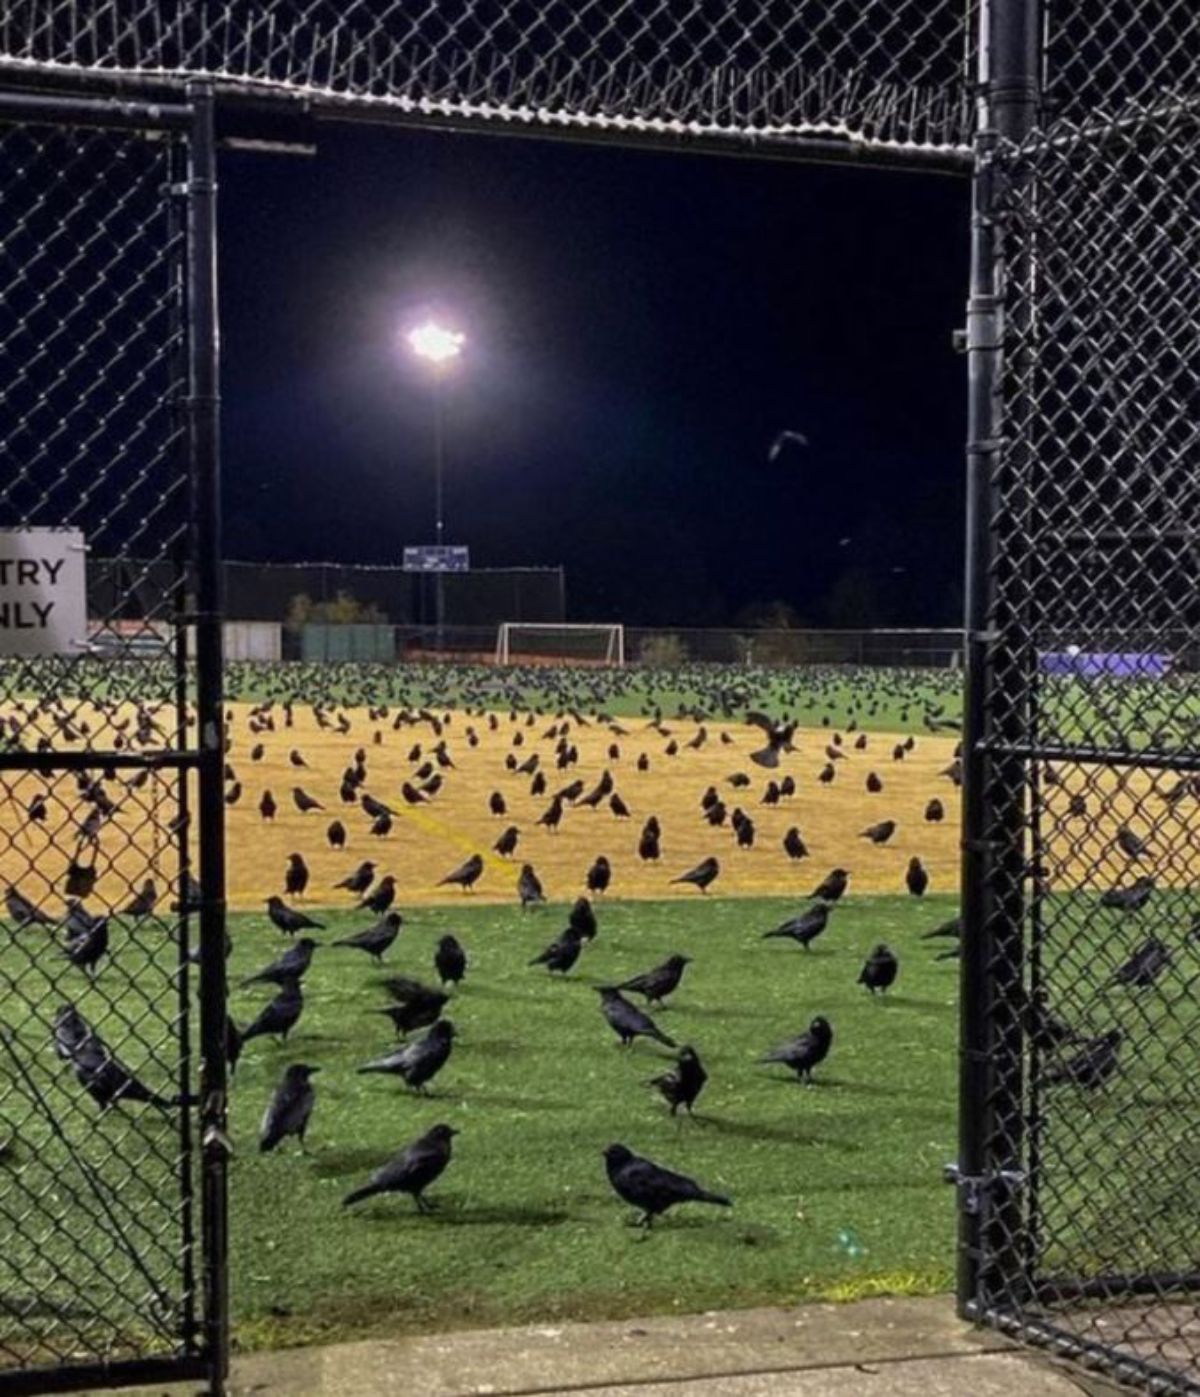 a large gathering of crows in a sports field